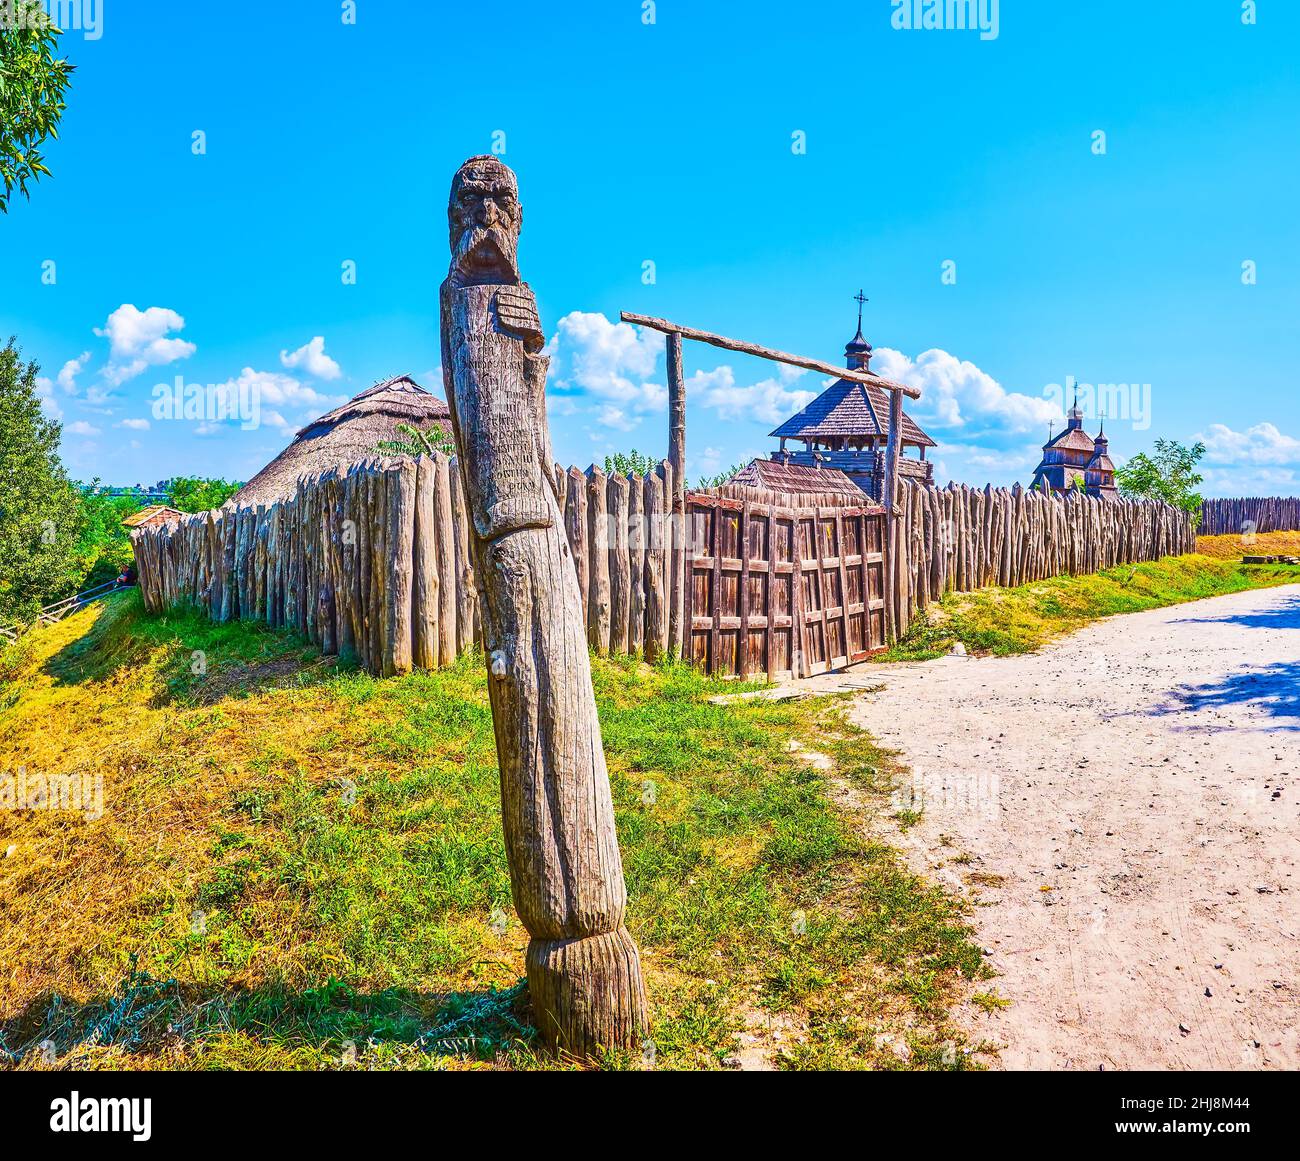 At the entrance to Zaporizhian Sich Fort located the wooden pillar with a bust of cossack and information of the complex, Zaporizhzhia, Ukraine Stock Photo